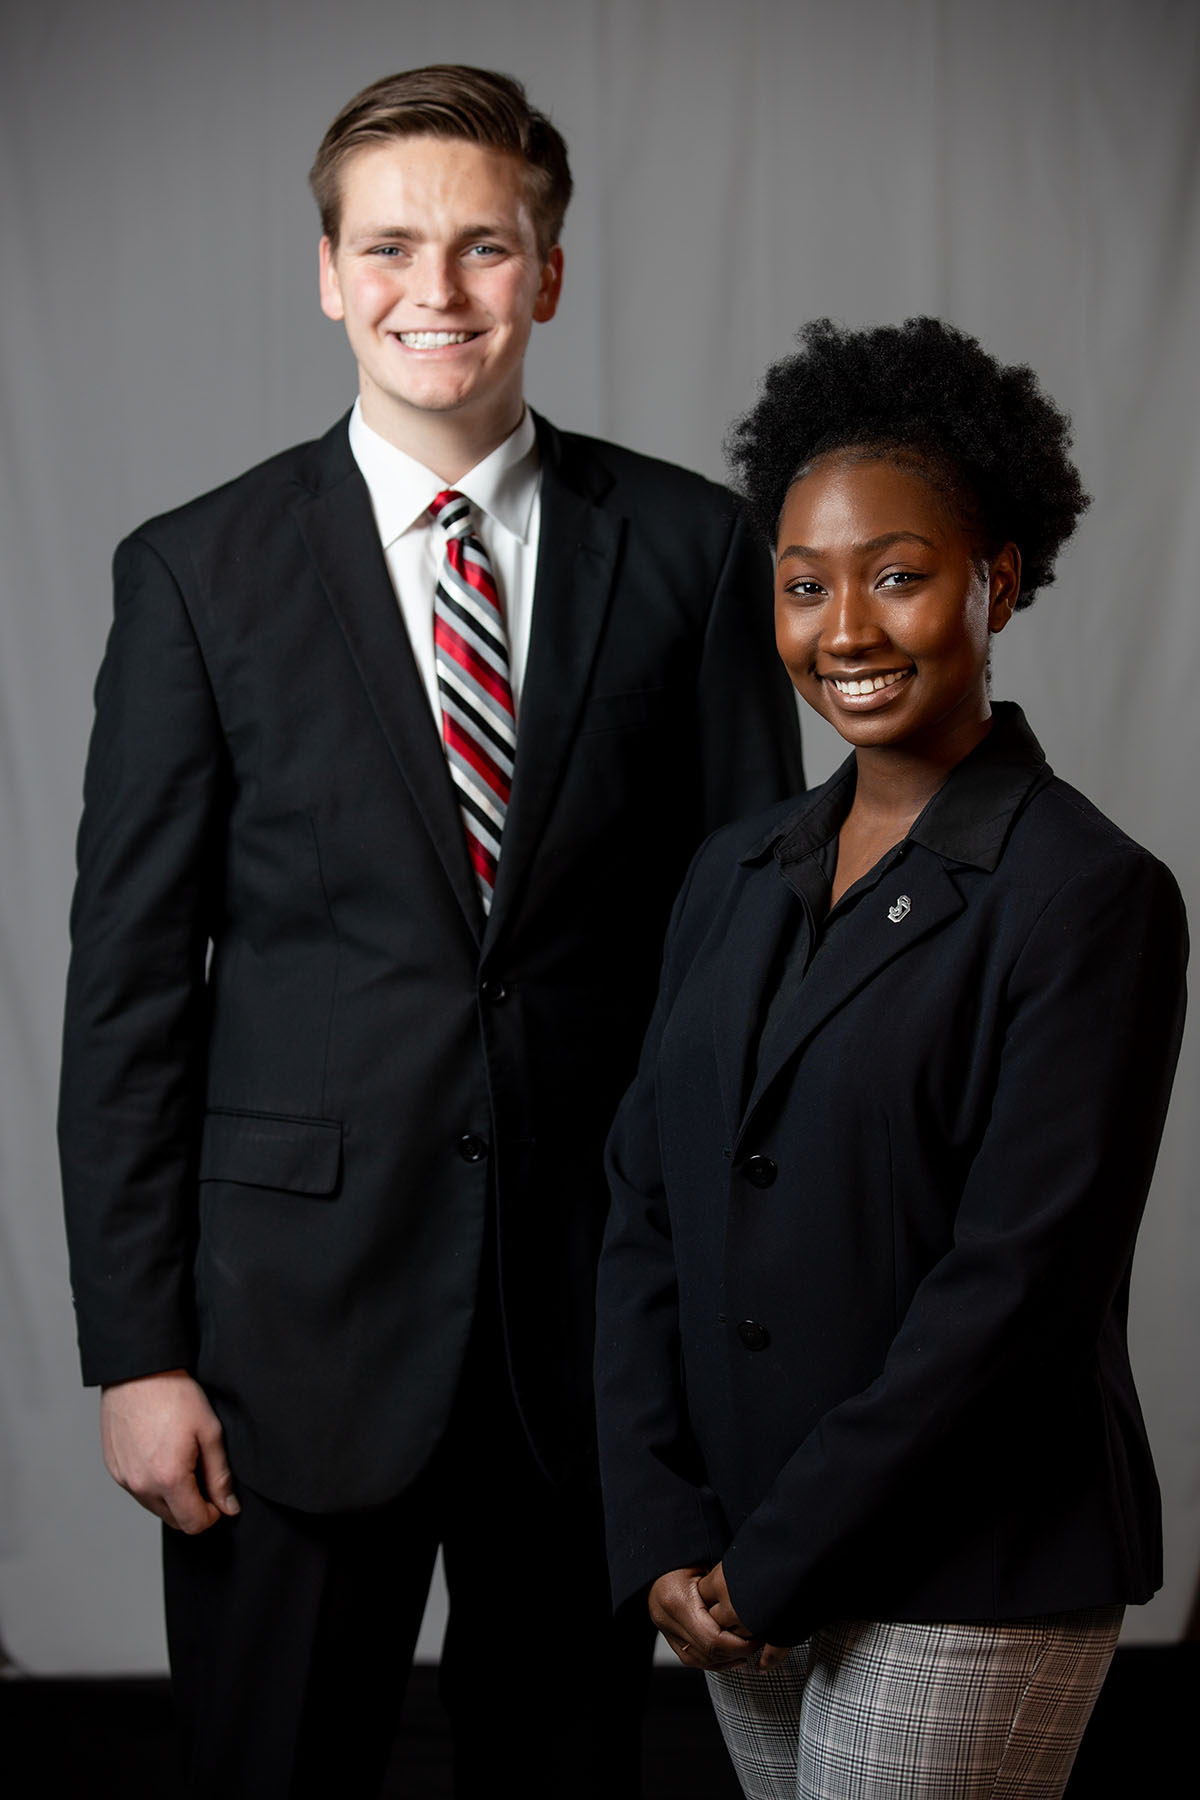 SGA President and Vice President reflect on semester, plan for future